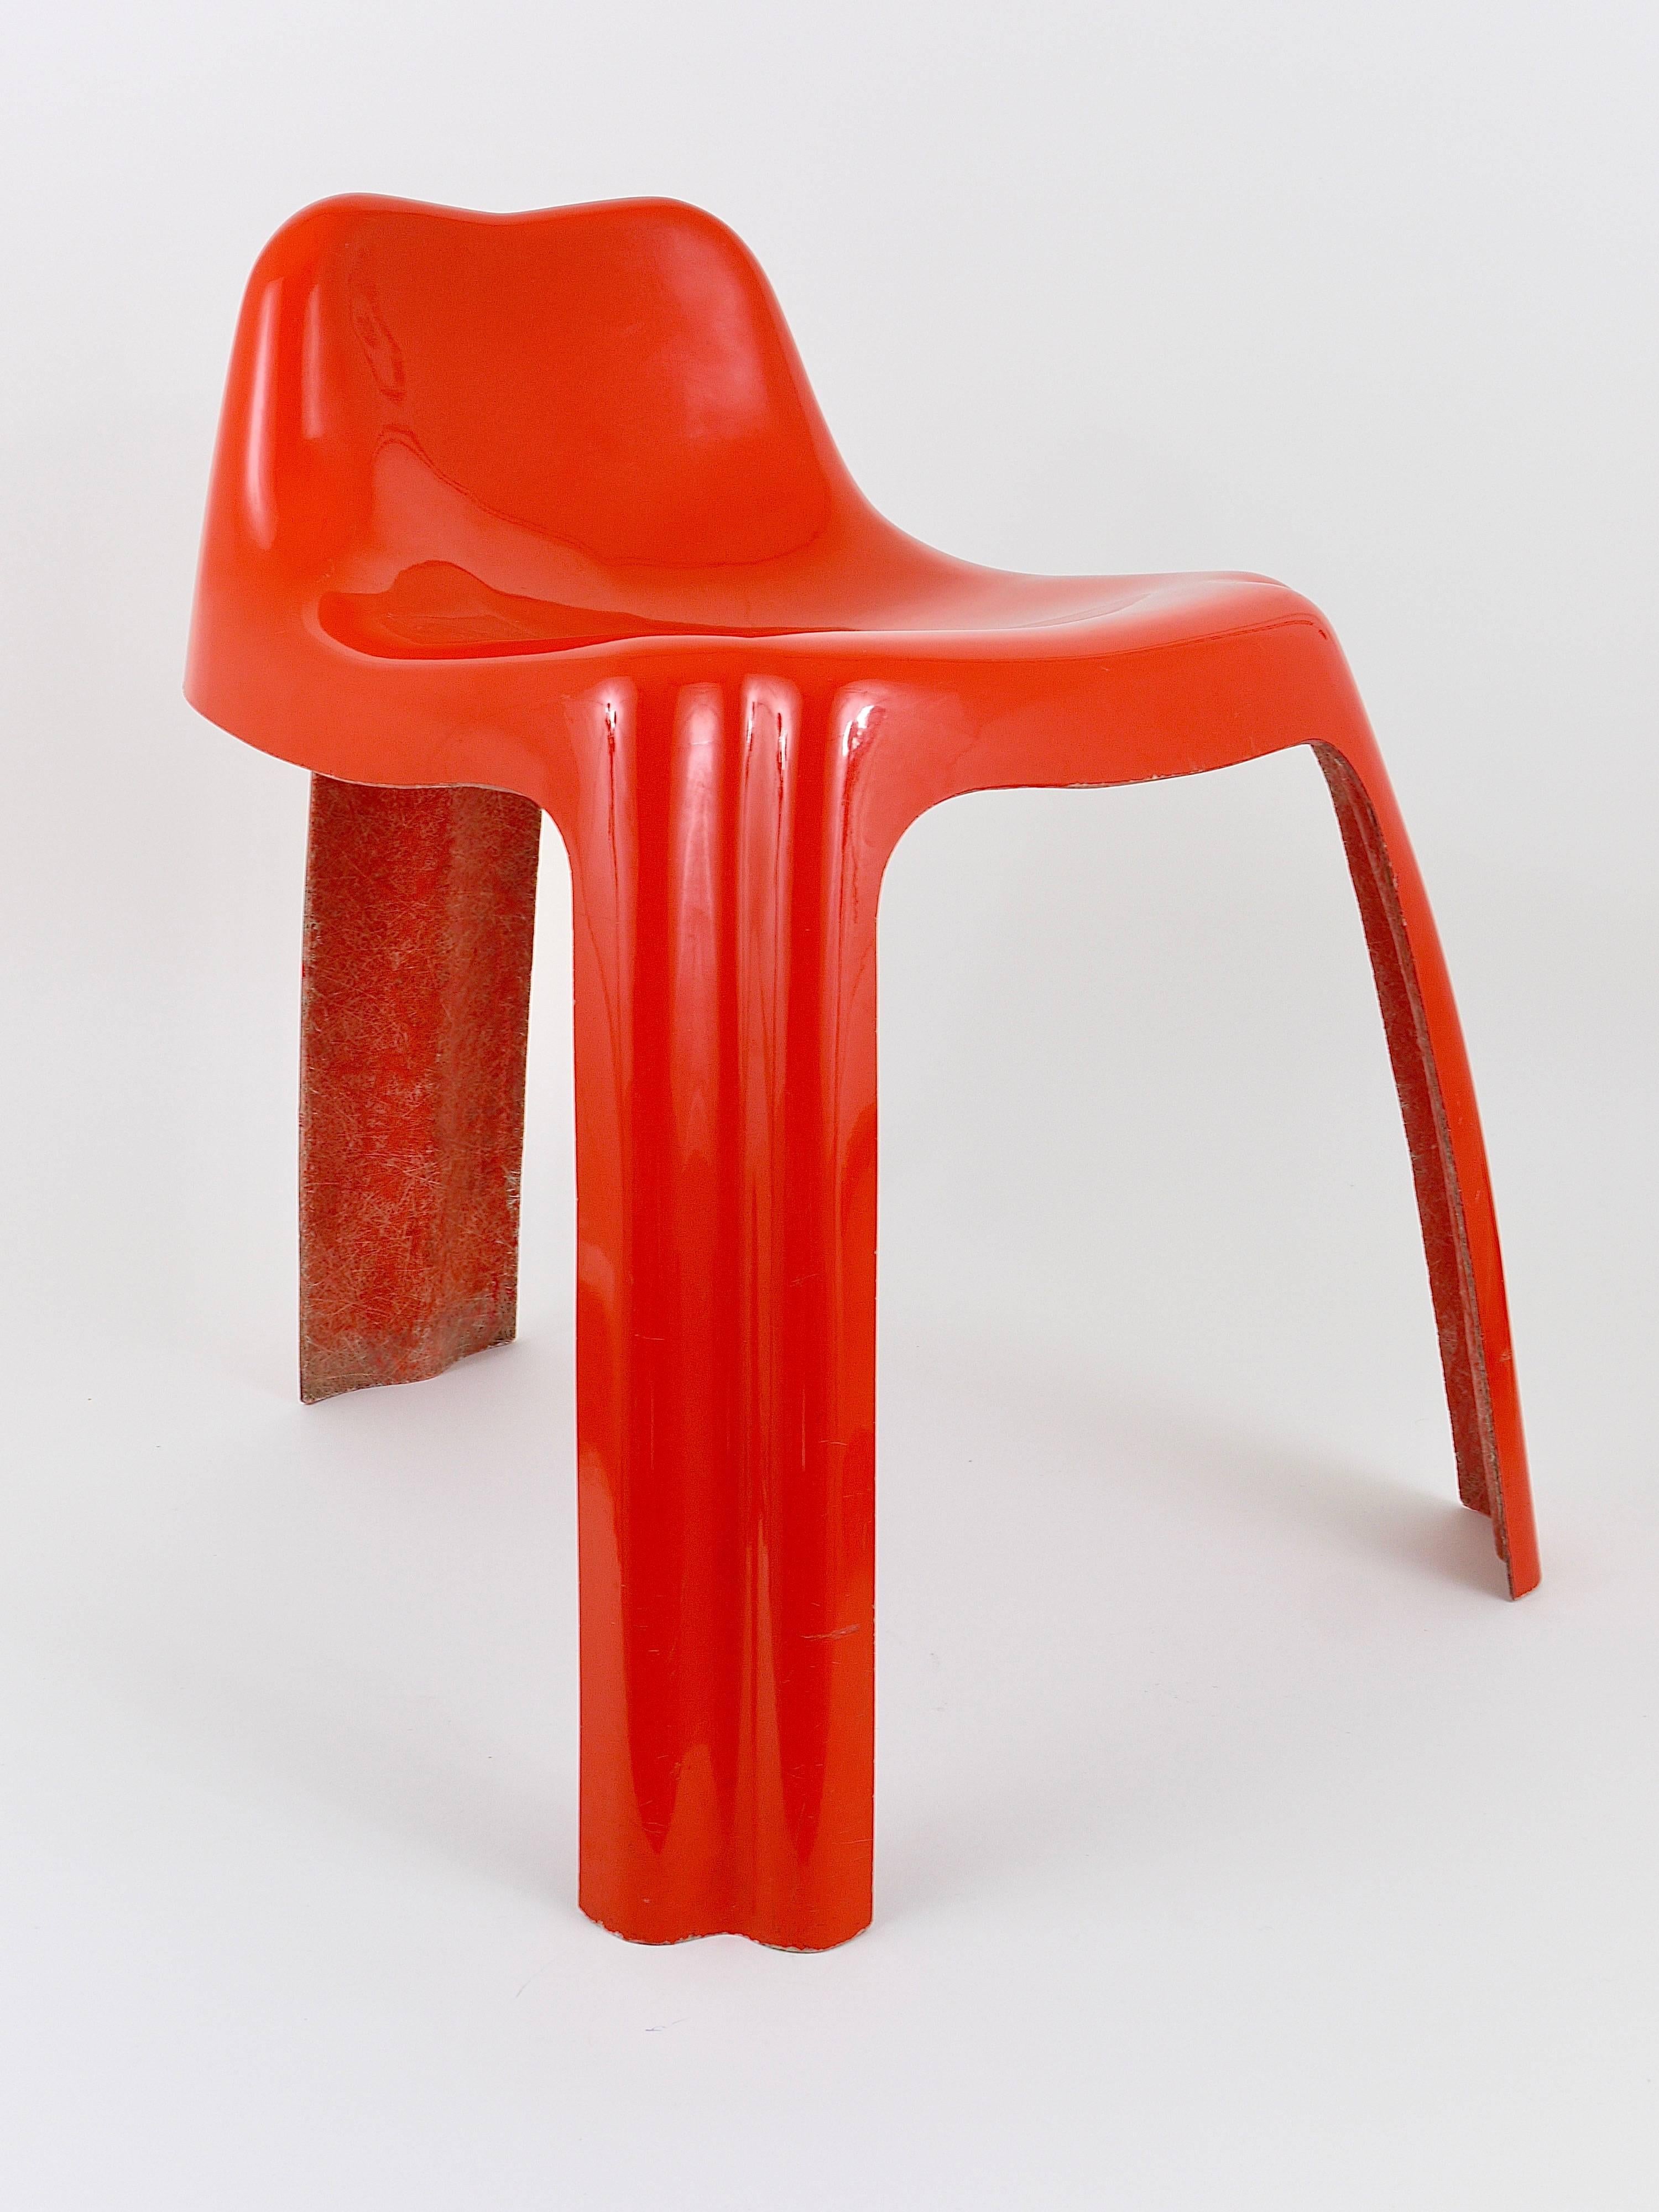 Lacquered Patrick Gingembre Ginger Orange Fiberglass Chair Ginger, Paulus, France, 1970s For Sale